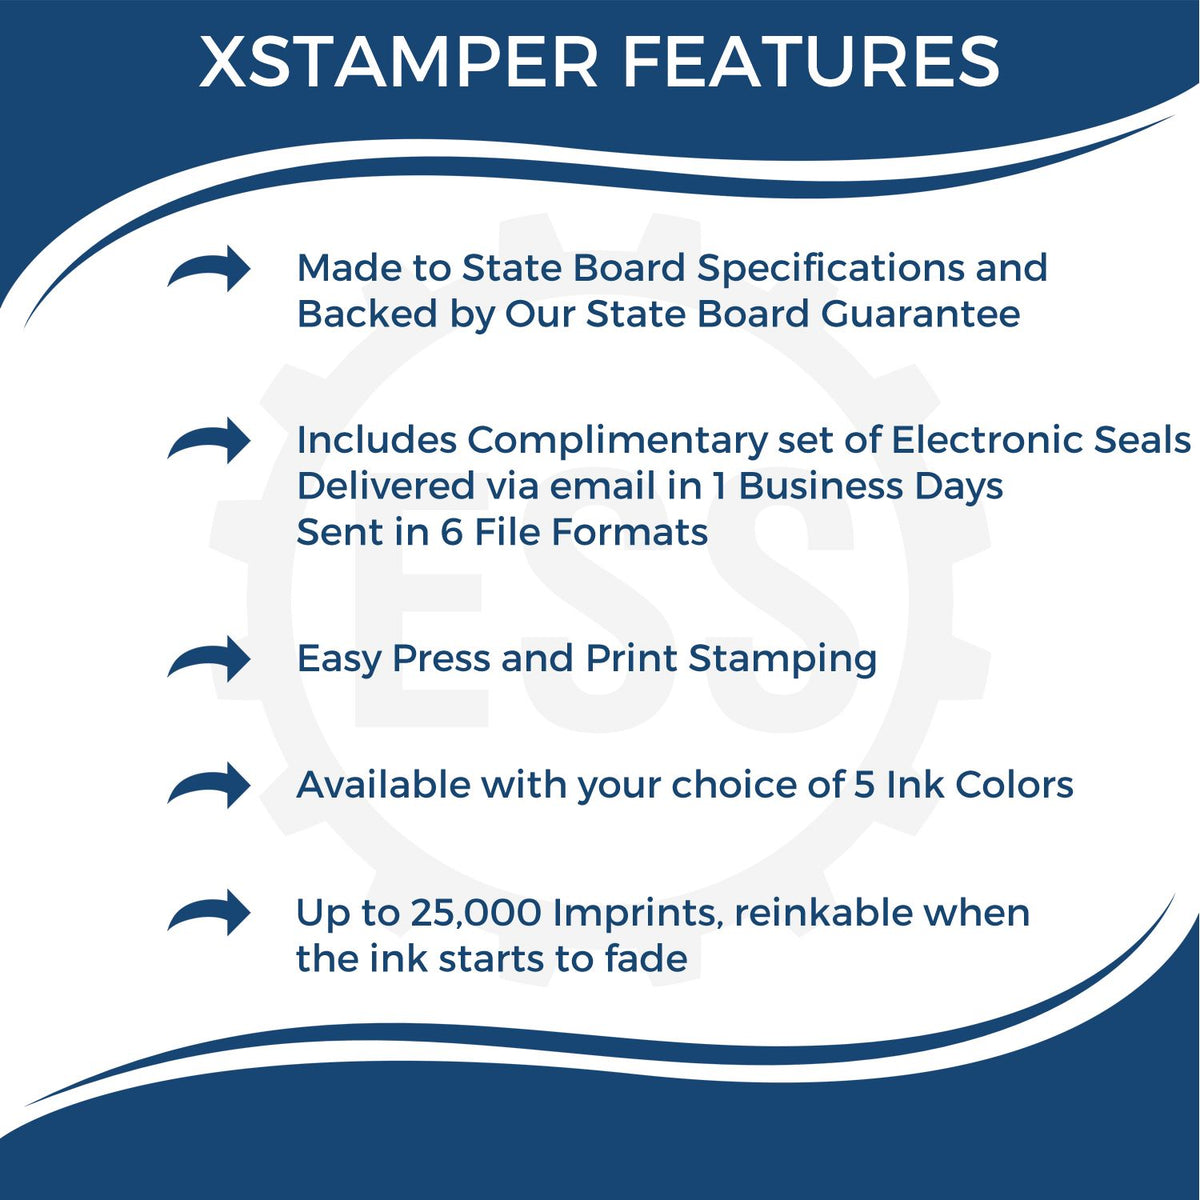 Xstamper Public Weighmaster Pre-Inked Rubber Stamp of Seal